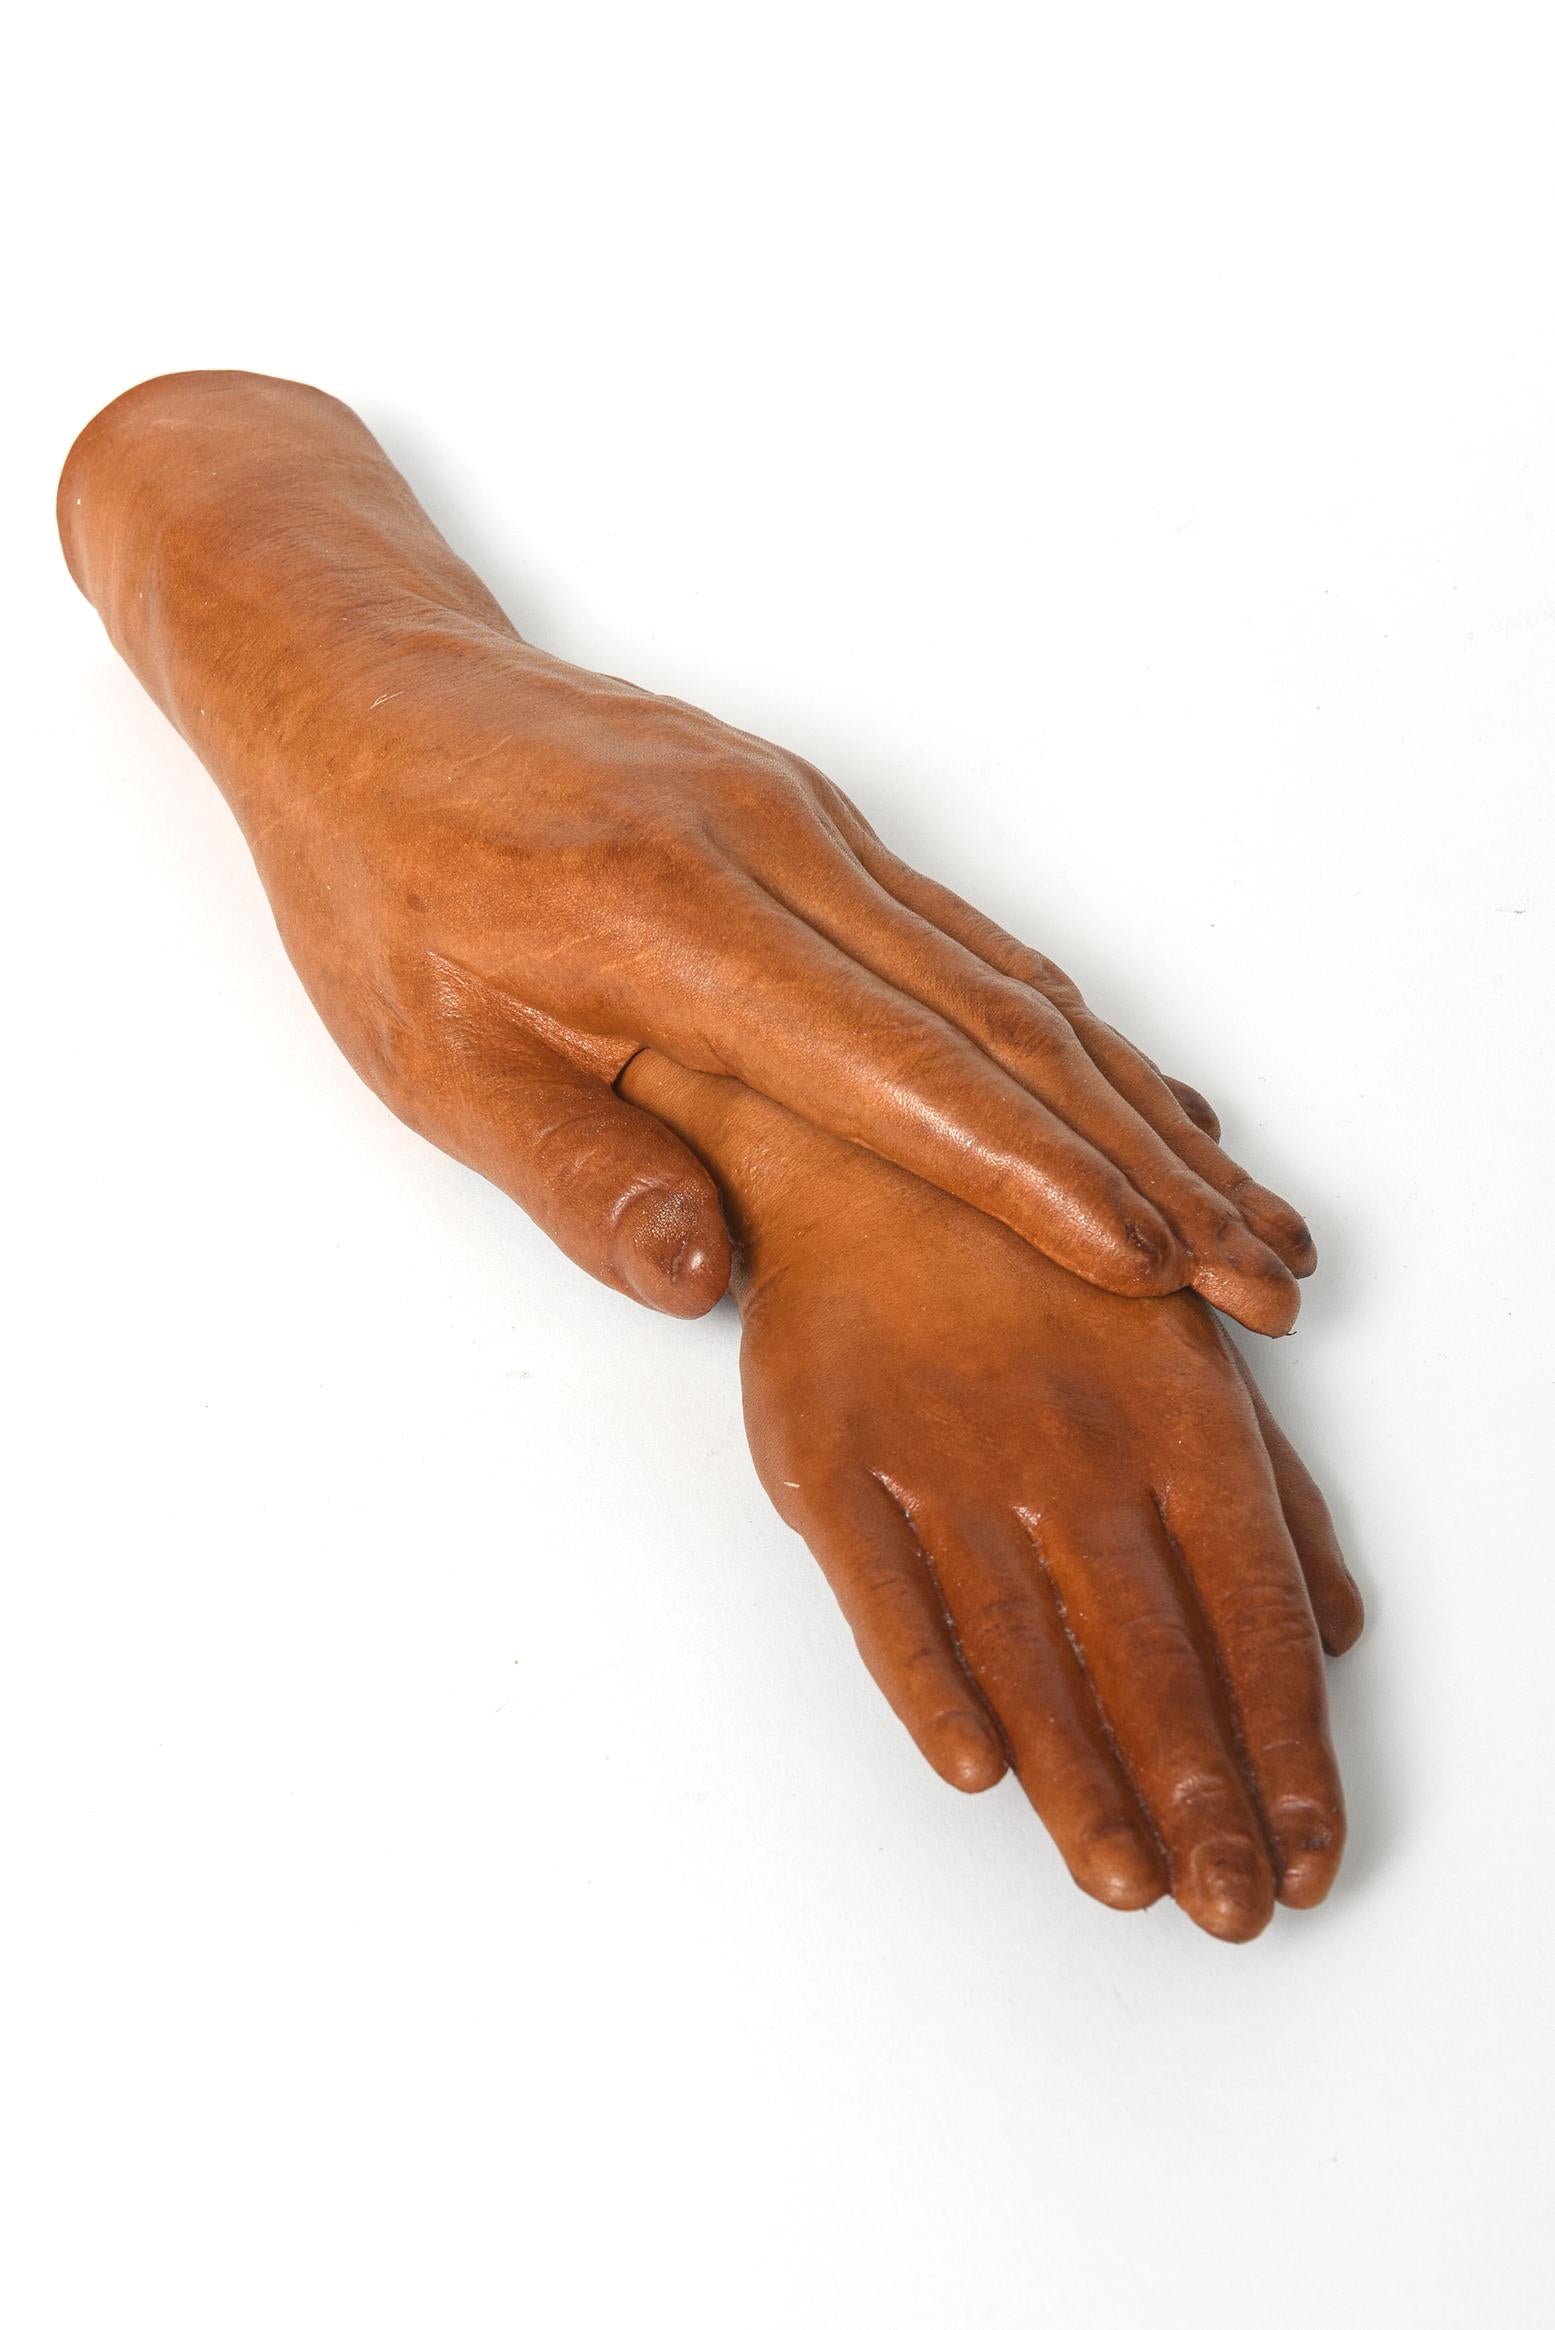 Late 20th Century Leather Mother and Child Hands Sculpture by Marcia Lloyd For Sale